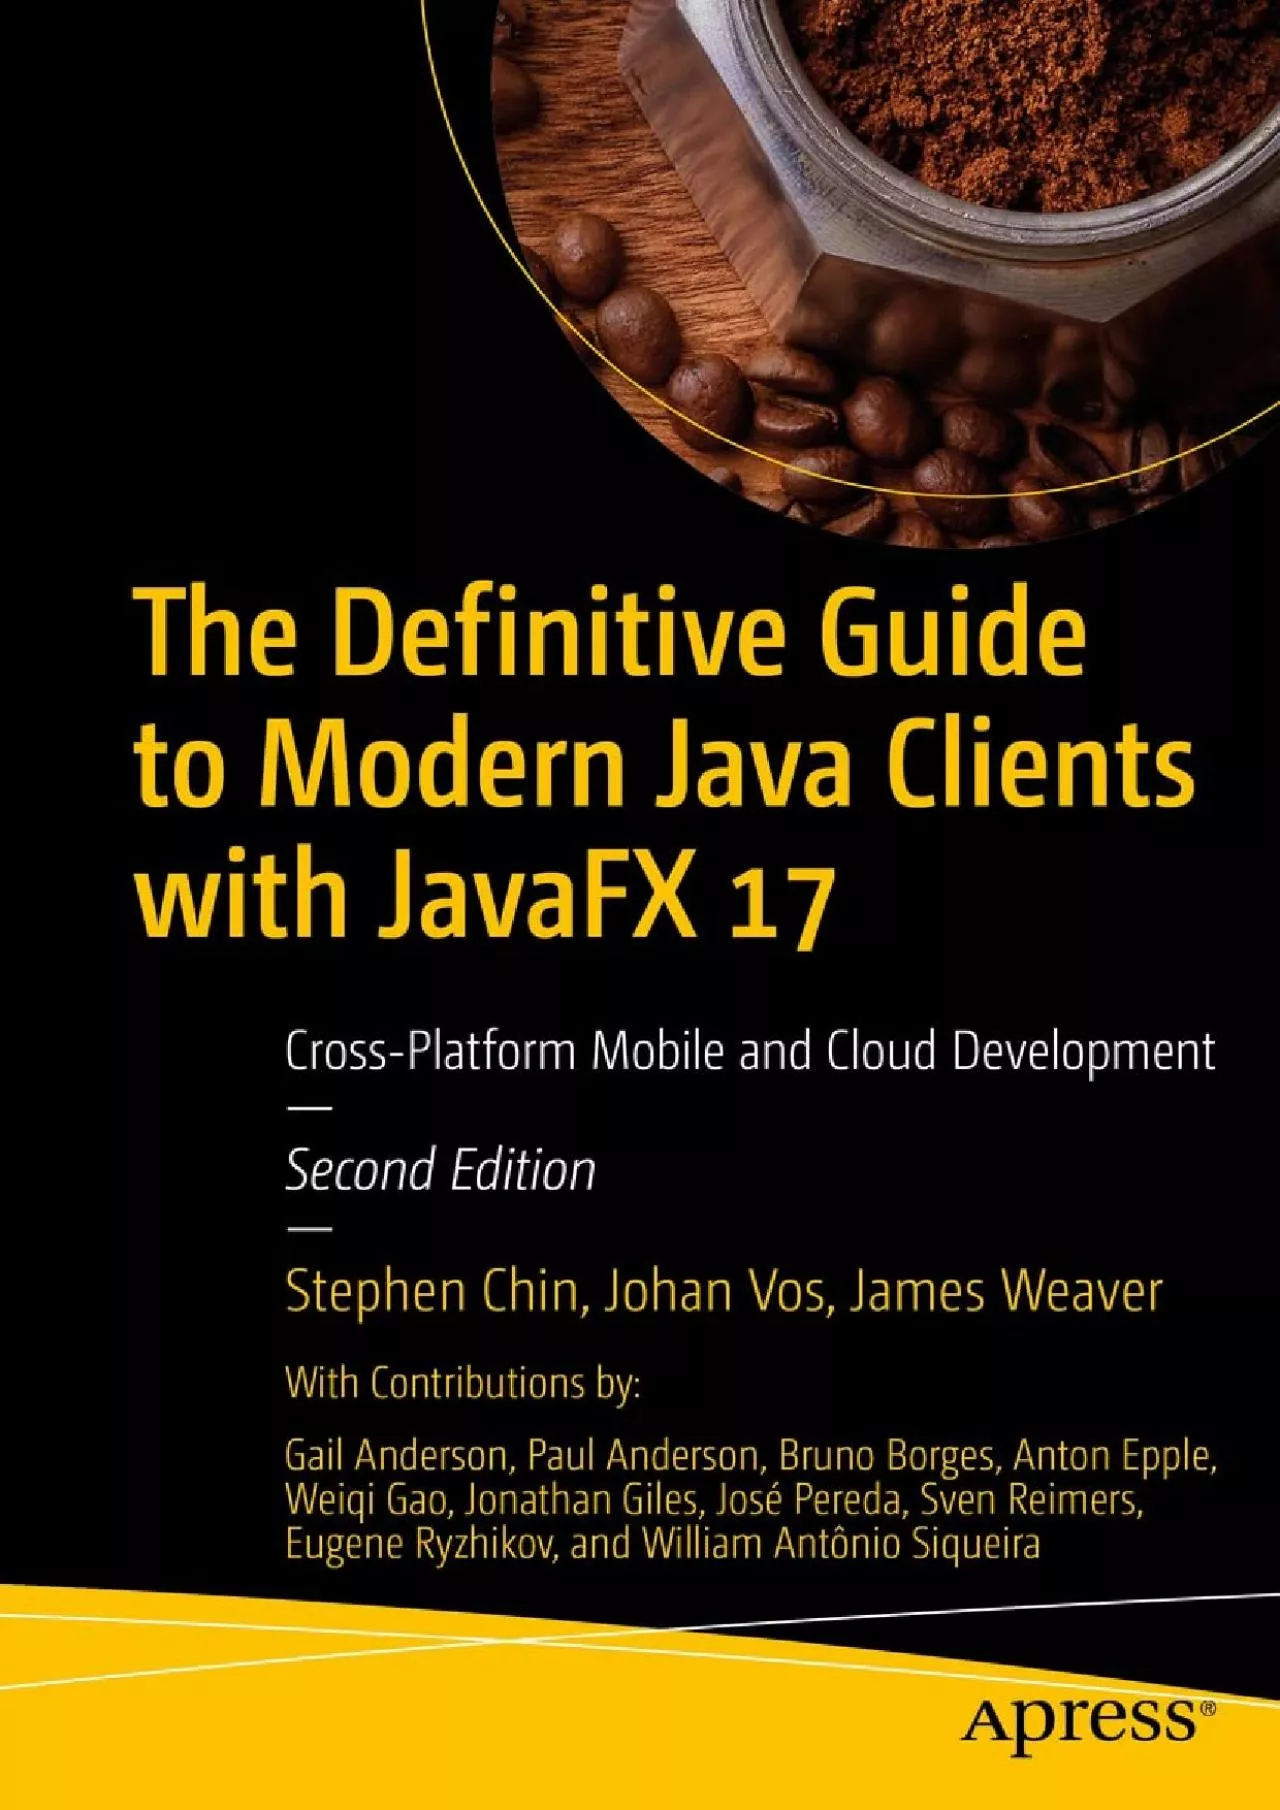 [PDF]-The Definitive Guide to Modern Java Clients with JavaFX 17: Cross-Platform Mobile